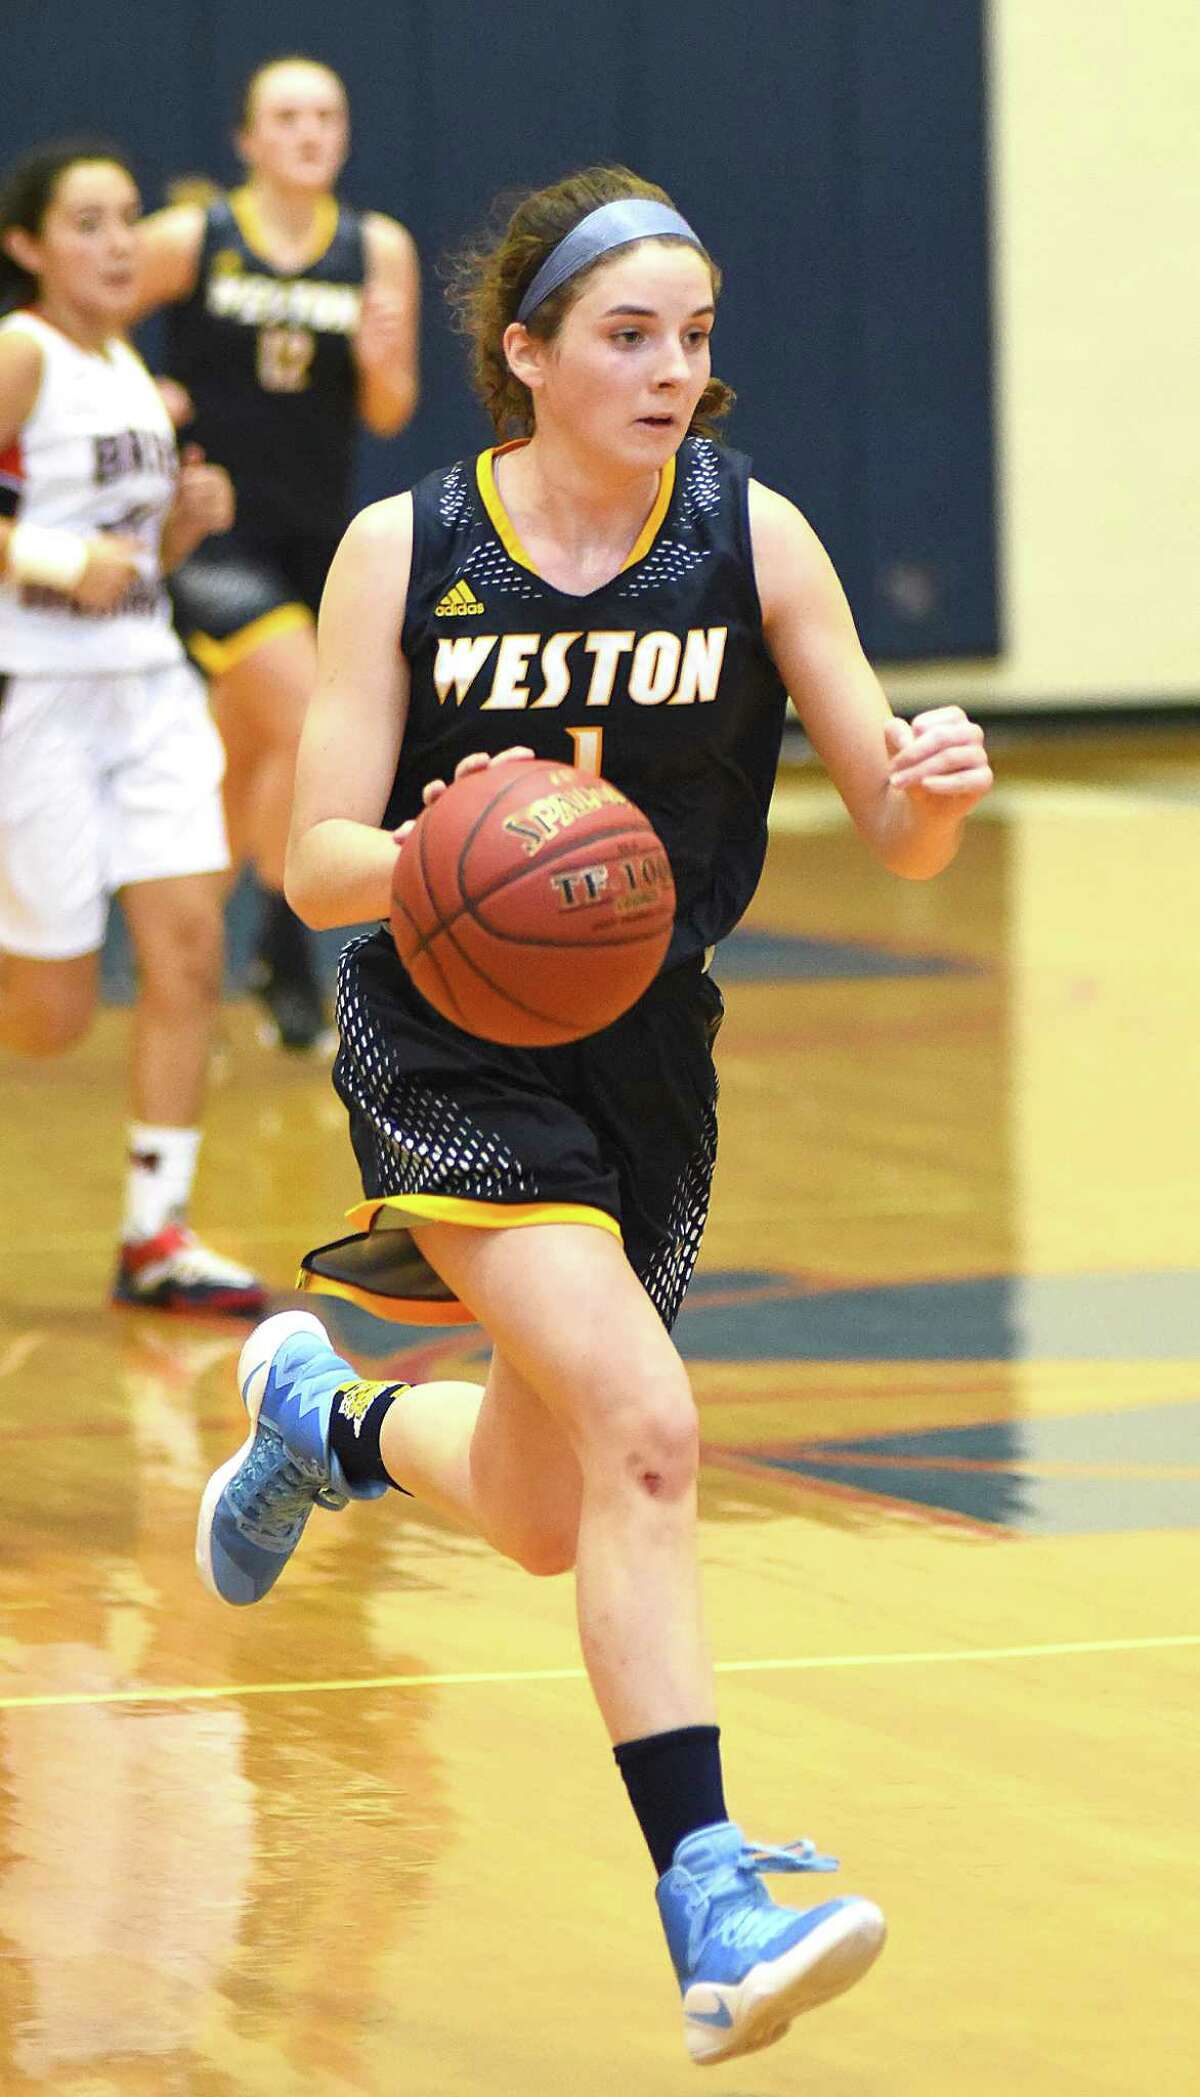 Weston’s sophomore guard Katie Orefice is averaging more than 20 points per game.